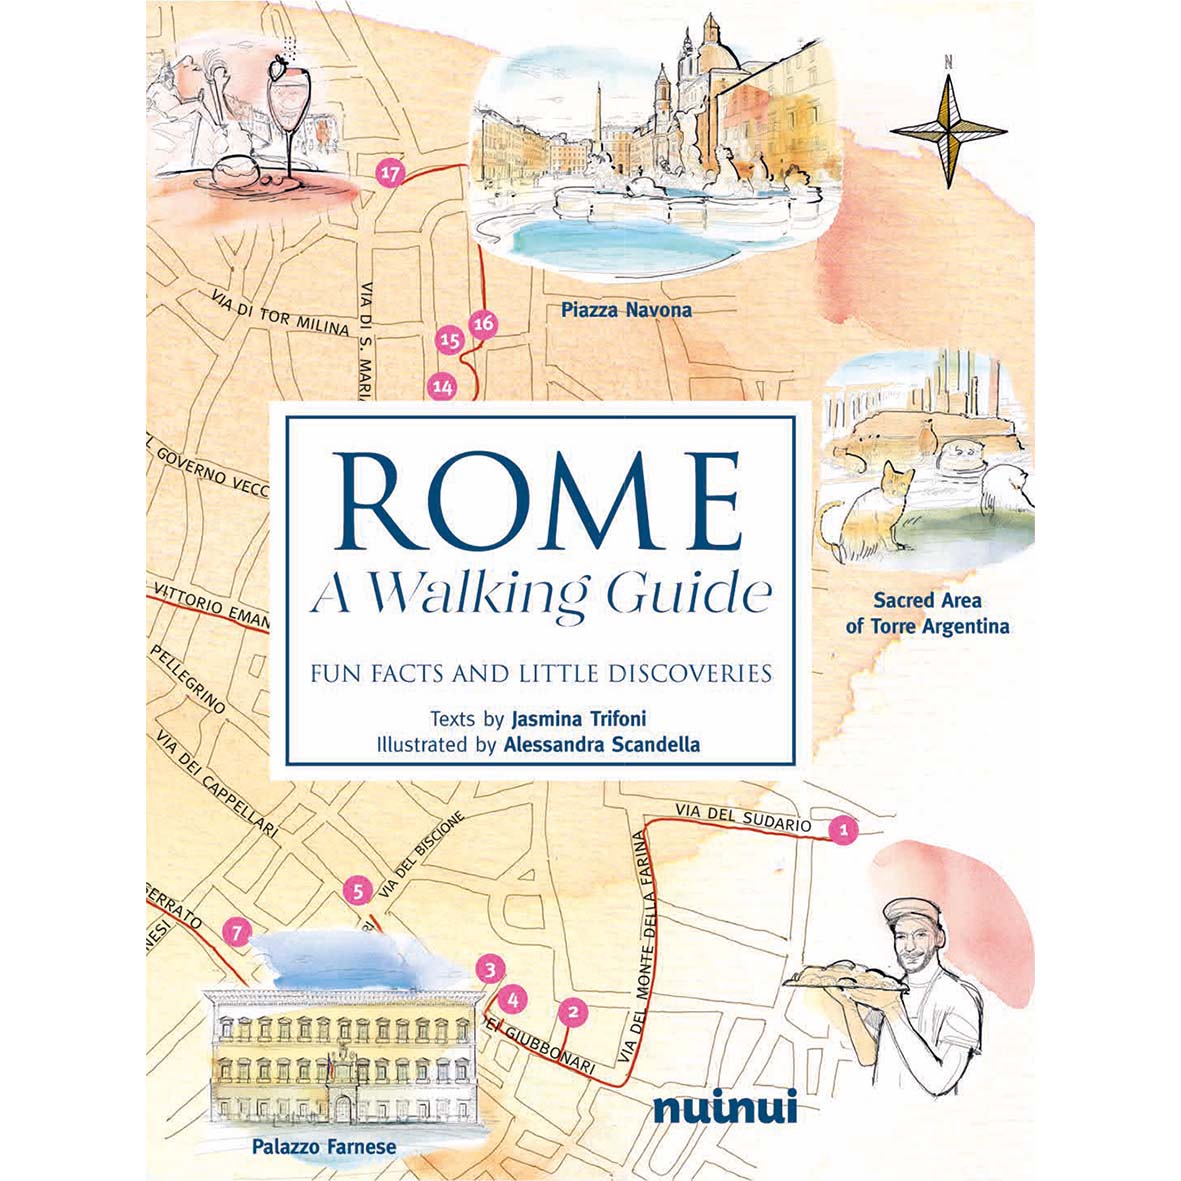 Rome. A walking guide - Fun facts and little discoveries